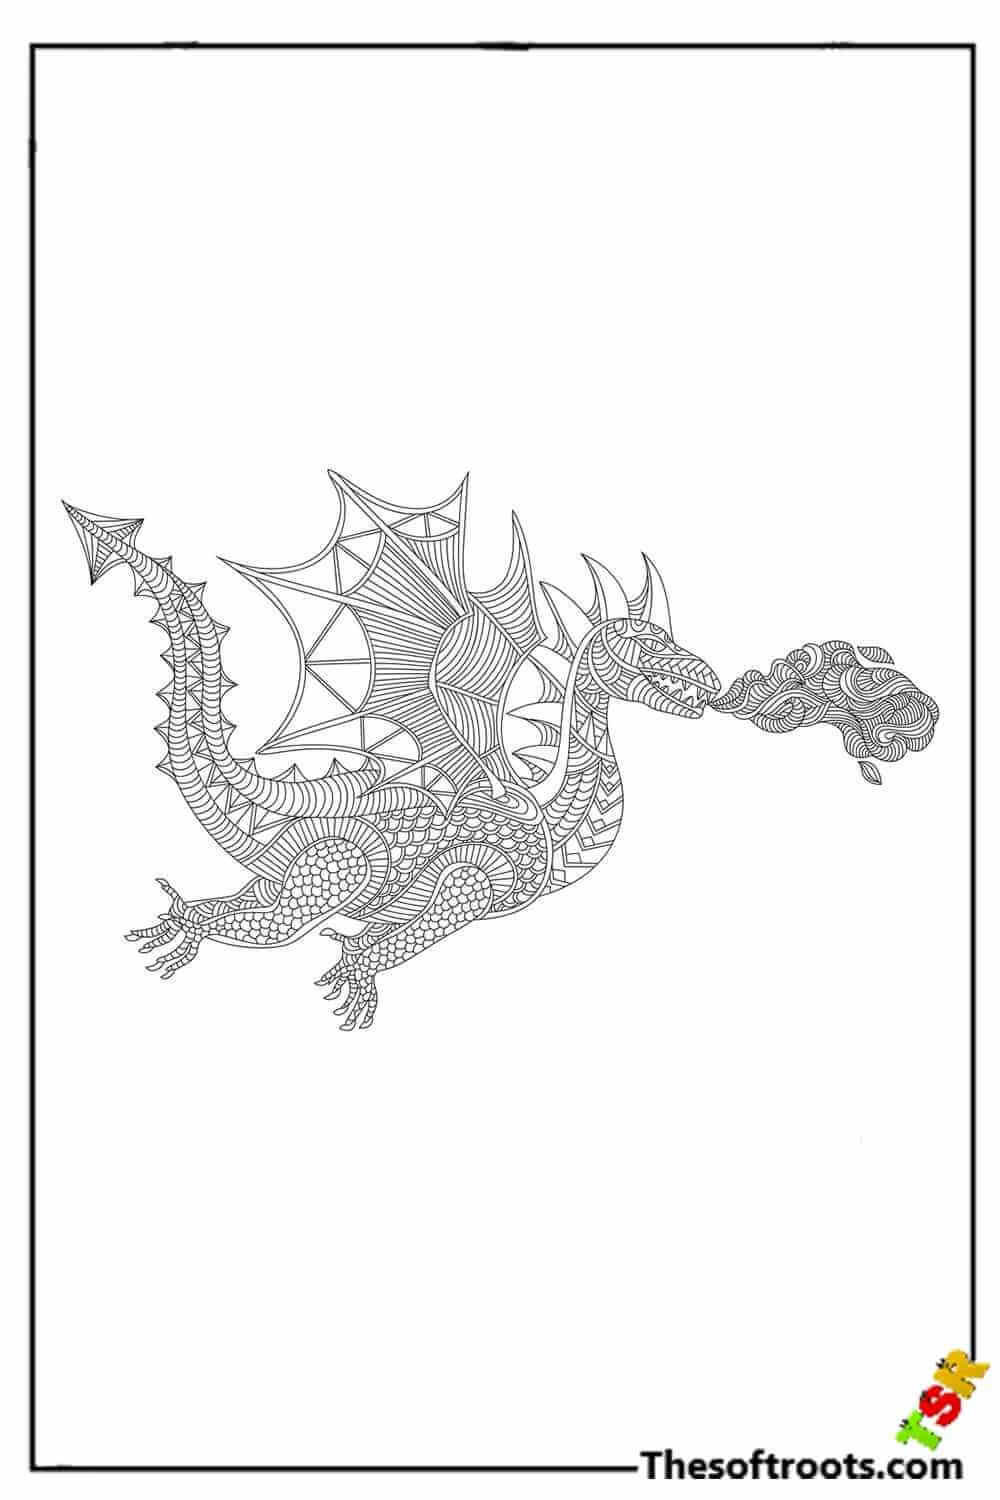 Adult Dragon coloring pages